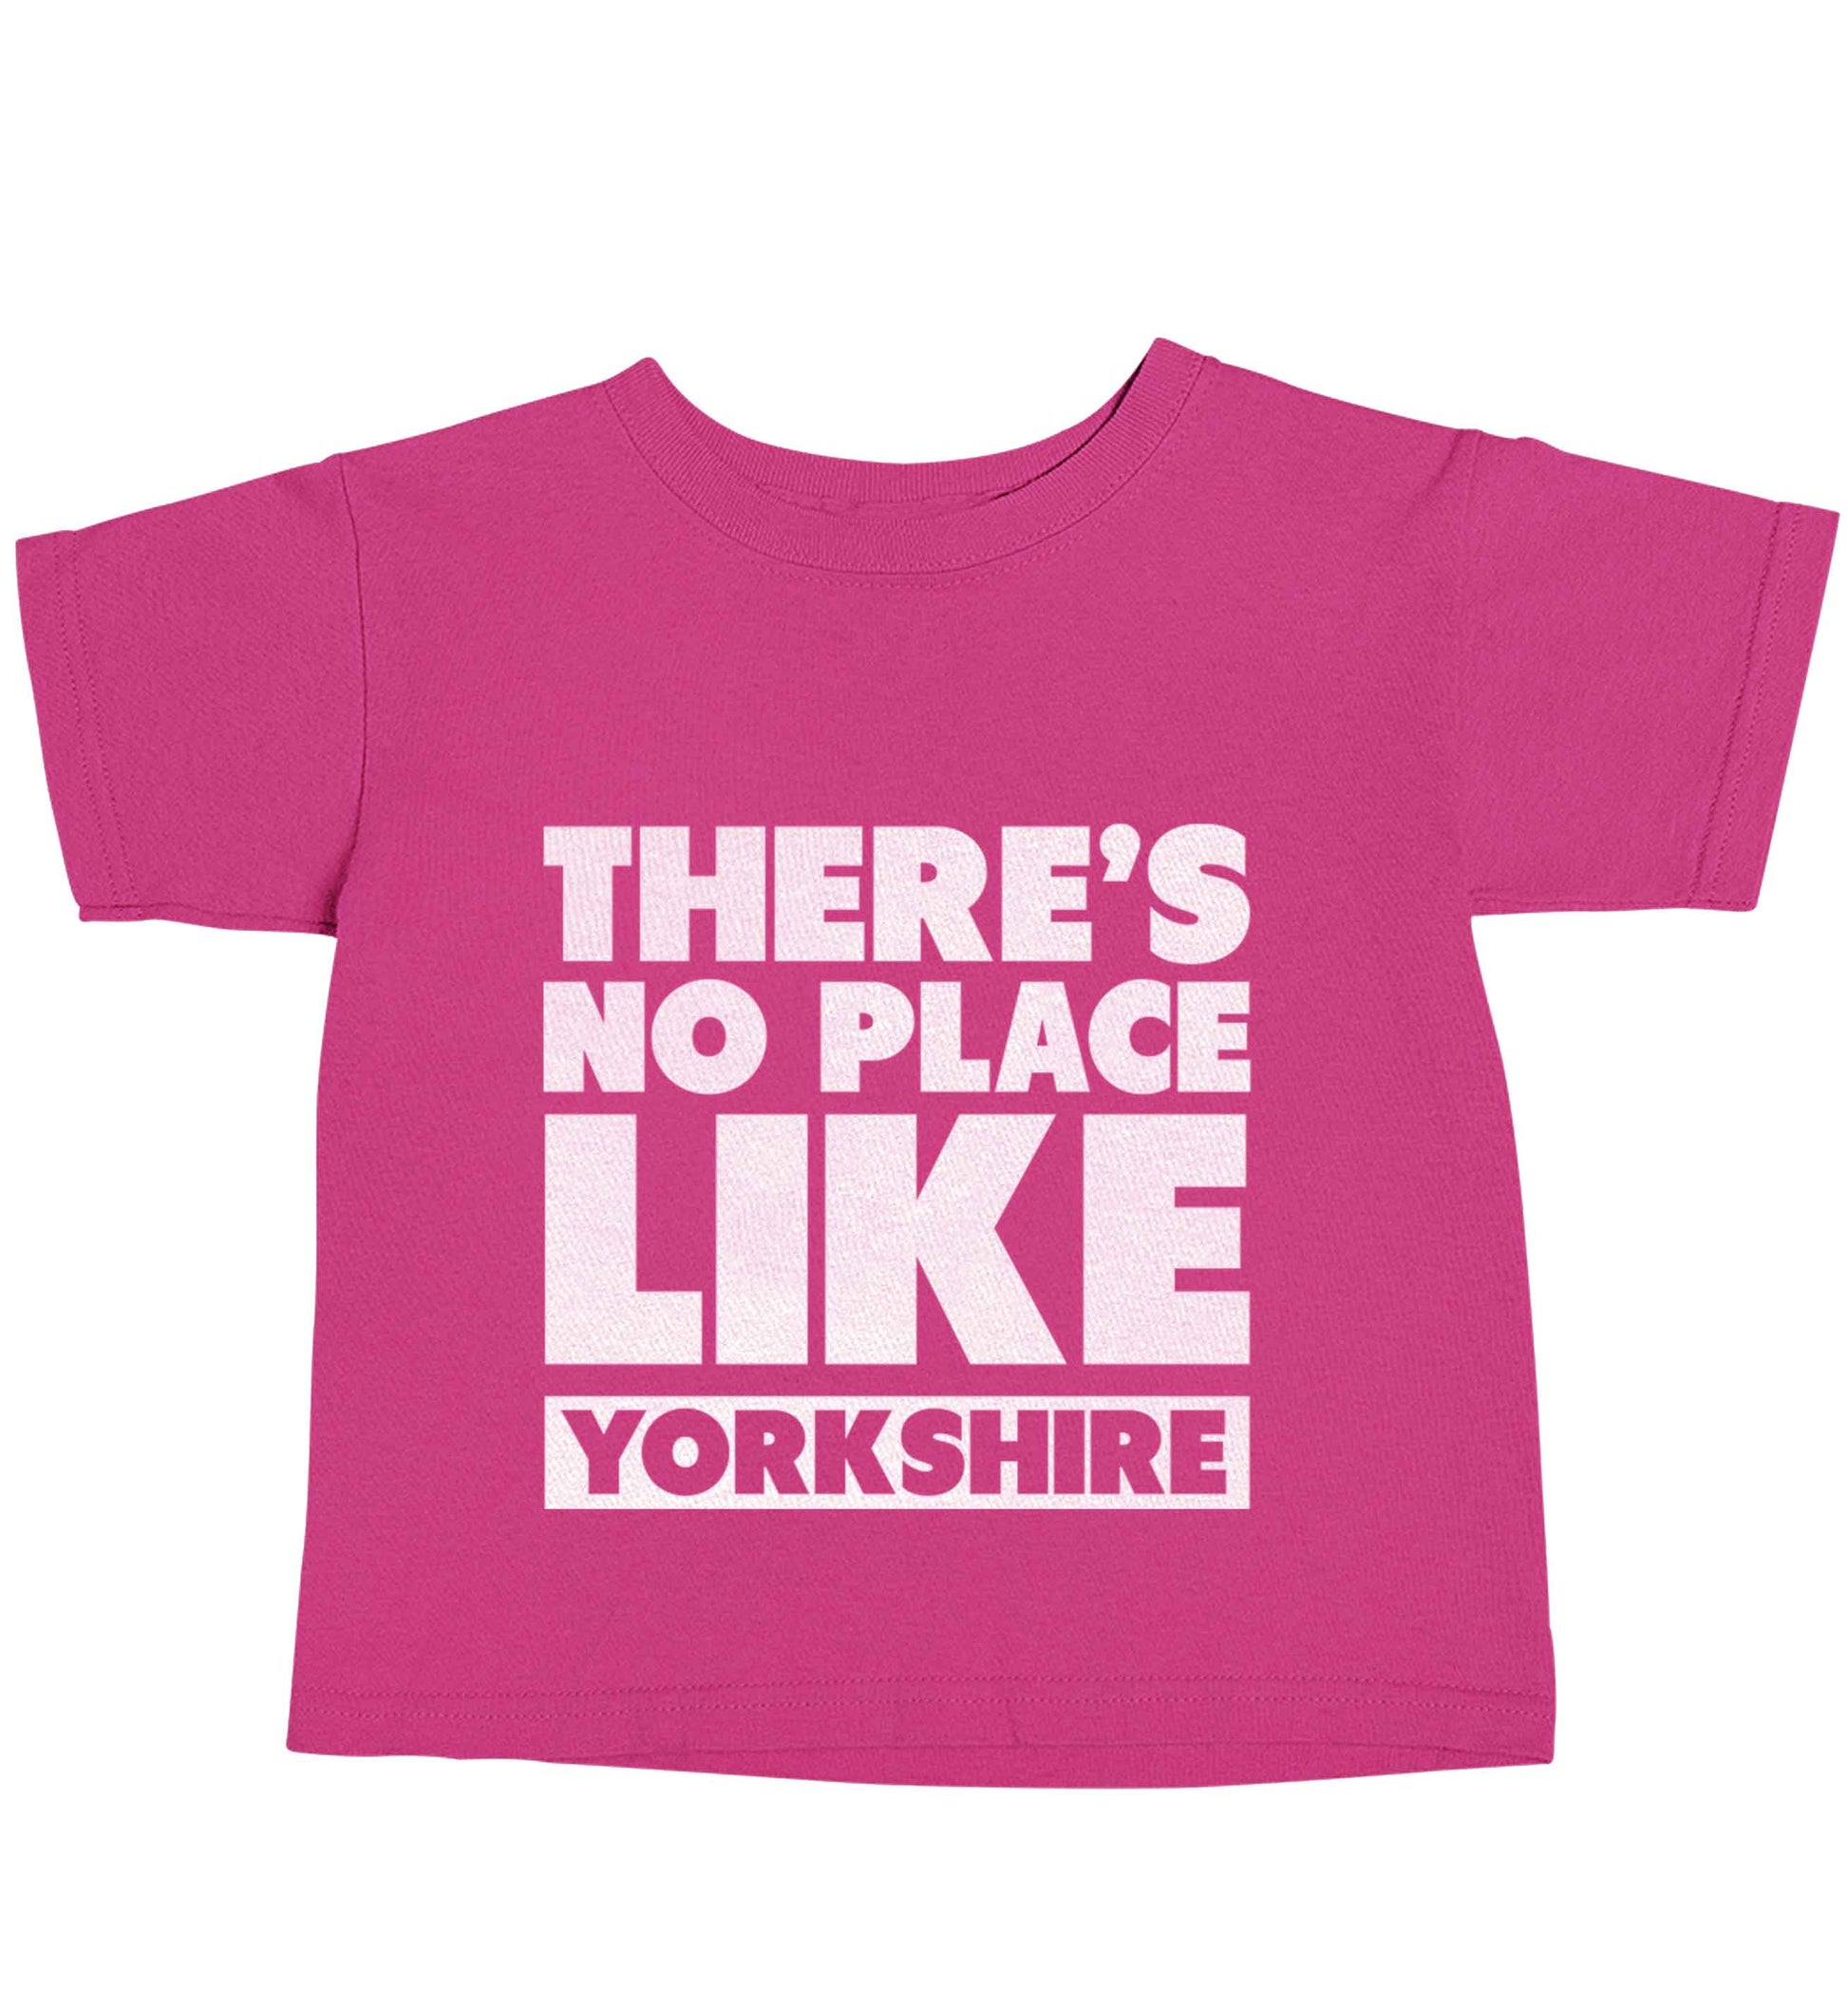 There's no place like Yorkshire pink baby toddler Tshirt 2 Years